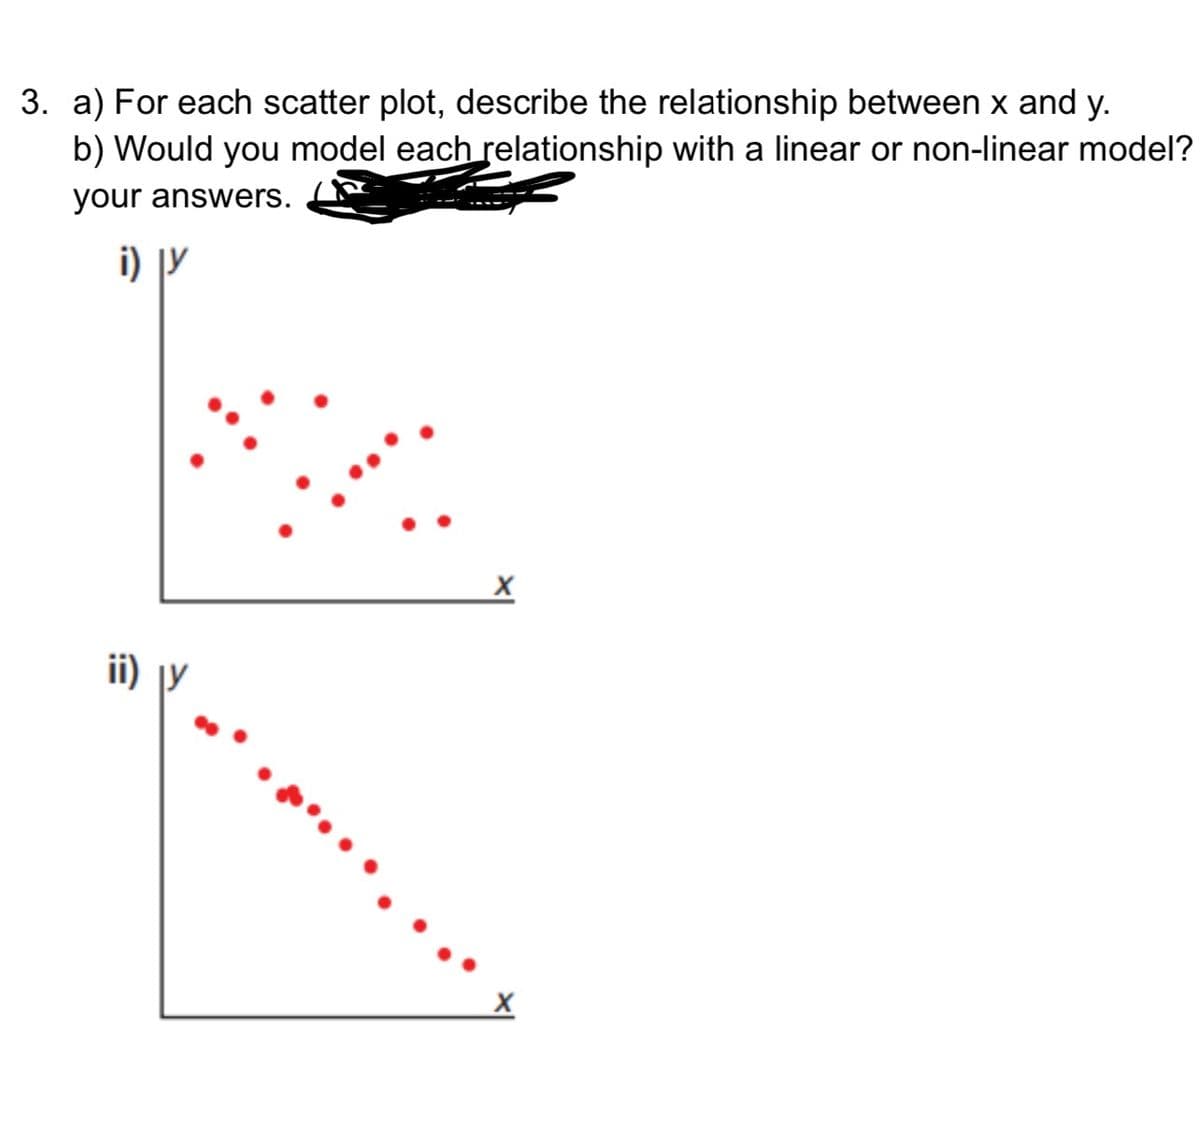 3. a) For each scatter plot, describe the relationship between x and y.
b) Would you model each relationship with a linear or non-linear model?
your answers.
i) jy
ii) jy
